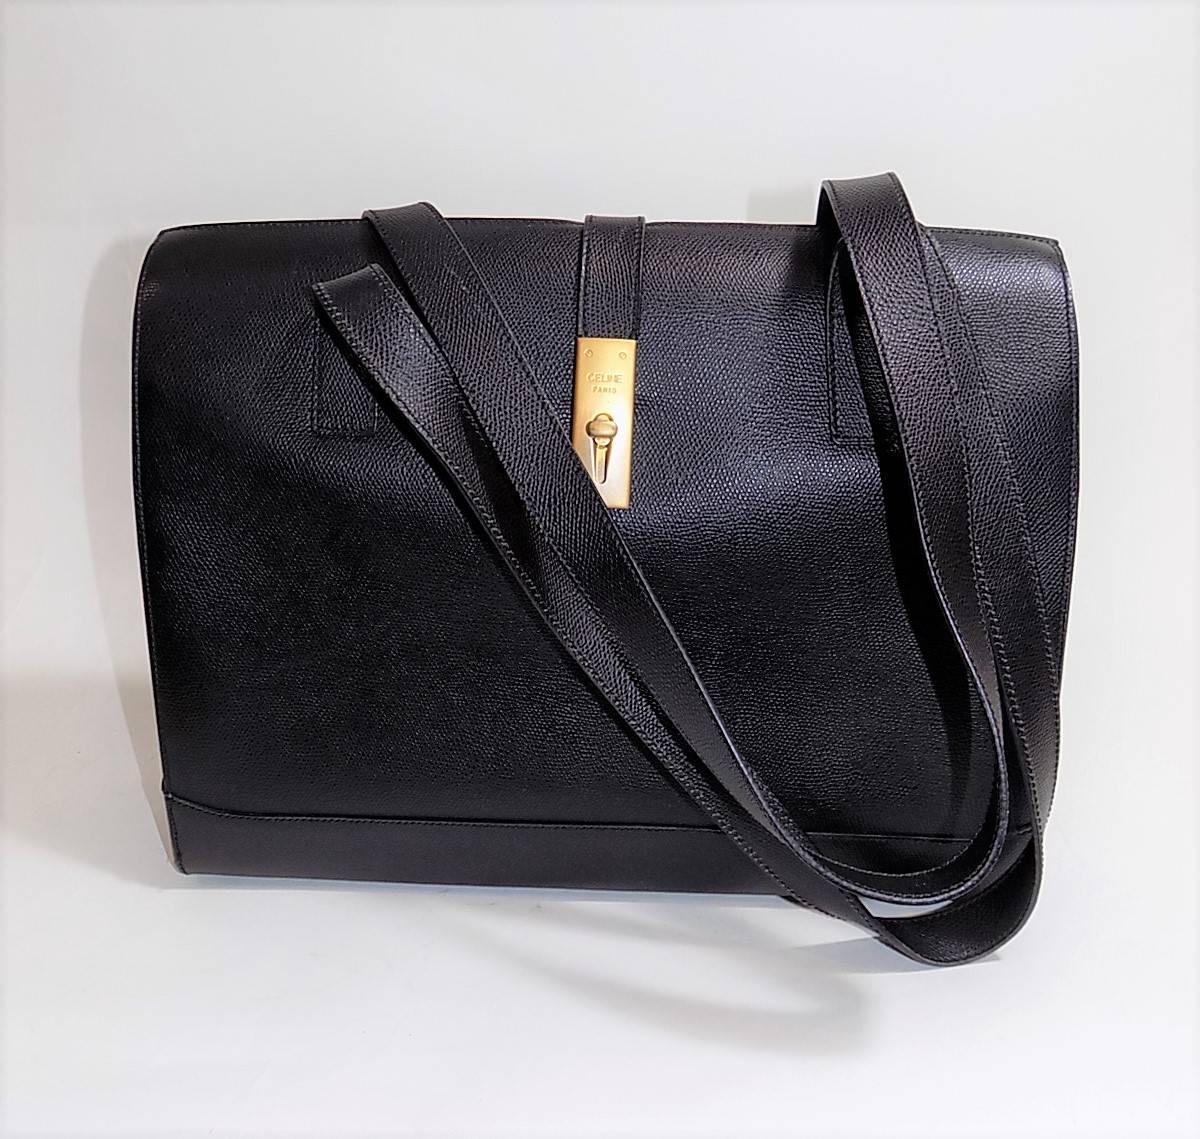 A must have for every power woman out there!!!!!. Black leather Celine hard sides briefcase. Gold tome brushed Celine lock front. Protective bottom feet. Two long shoulder straps. . When open it shows striking red supple leather lining. One large